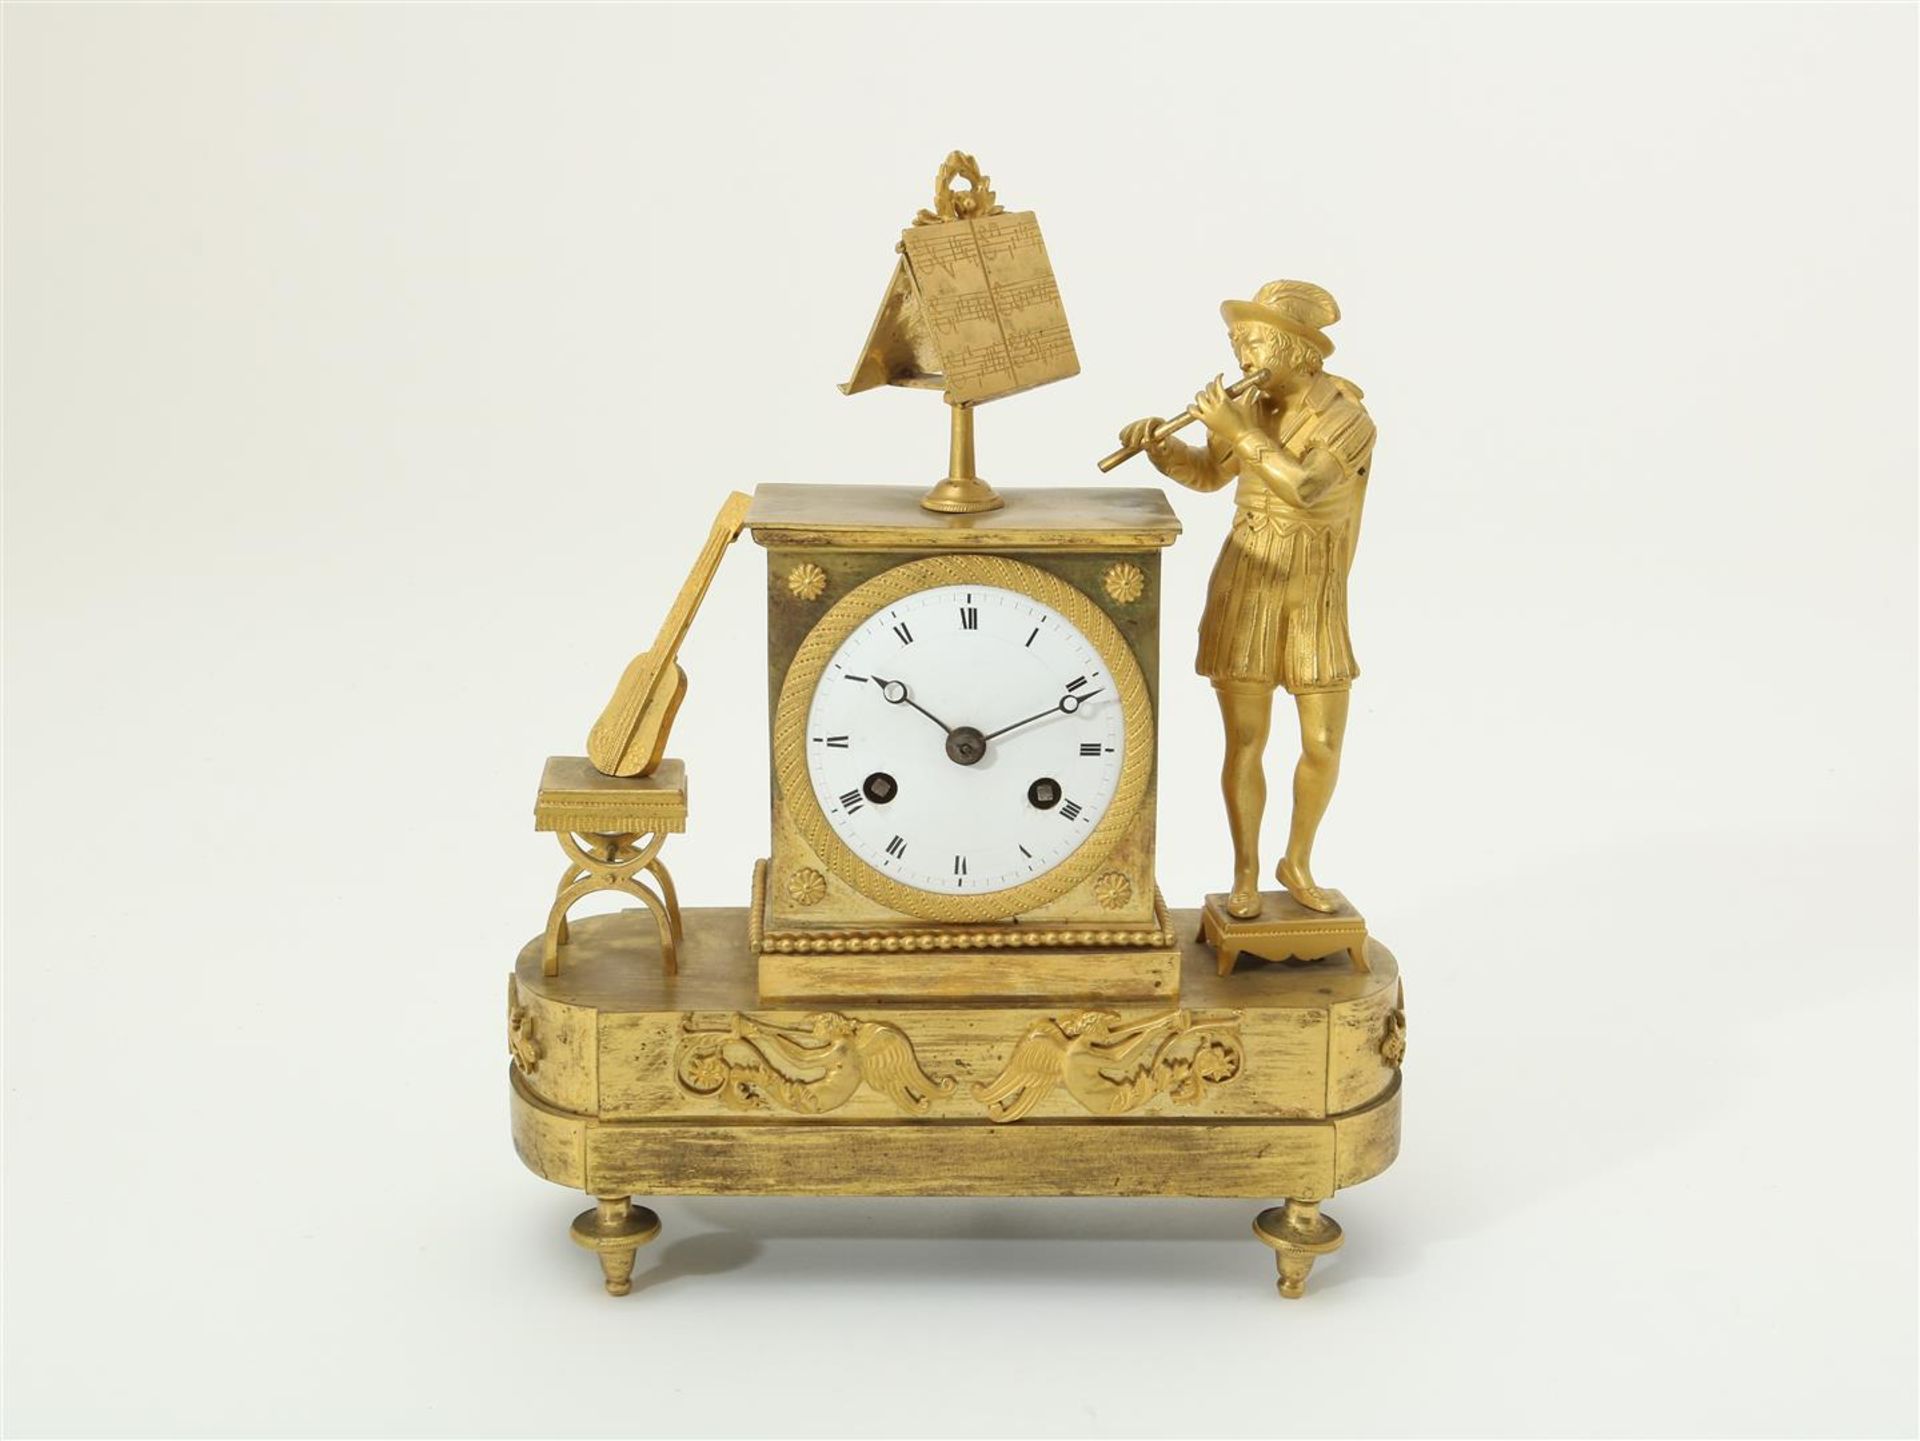 Fire-gilt Empire mantel clock with musician and sheet music, with running and percussion